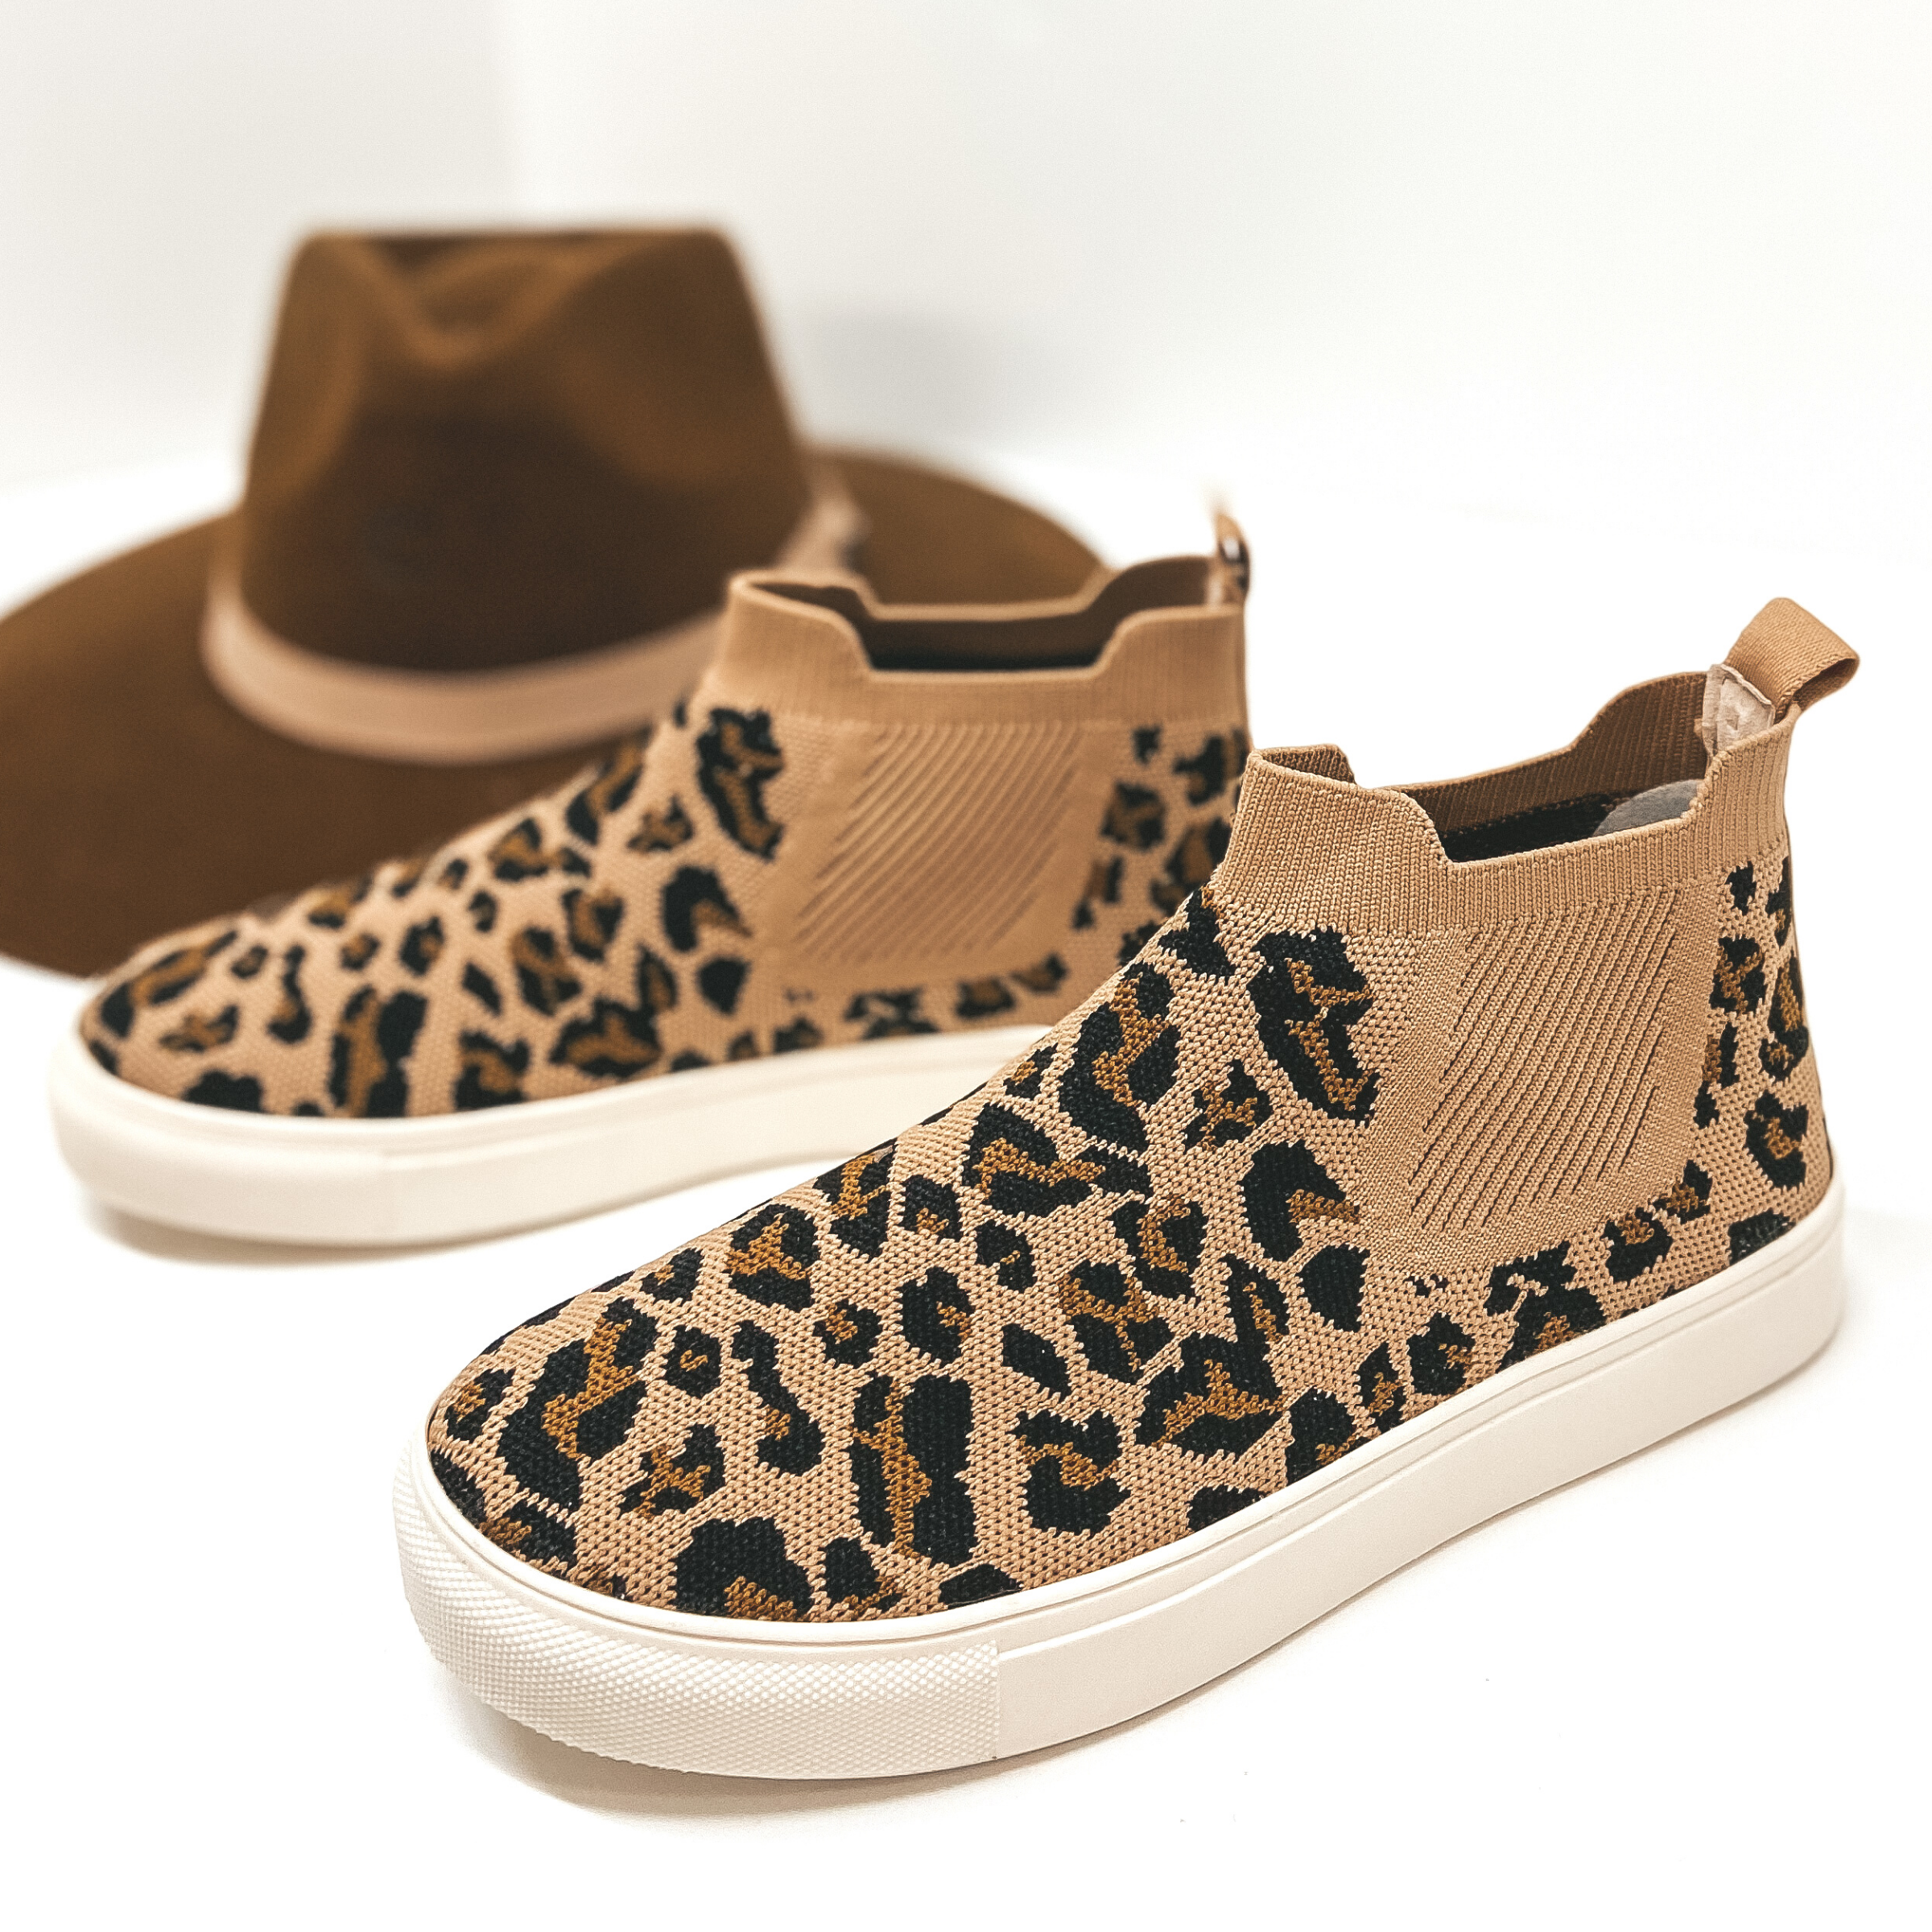 High top knit leopard sneakers in a leopard print. Shoes are pictured on white background with a brown rancher hat.